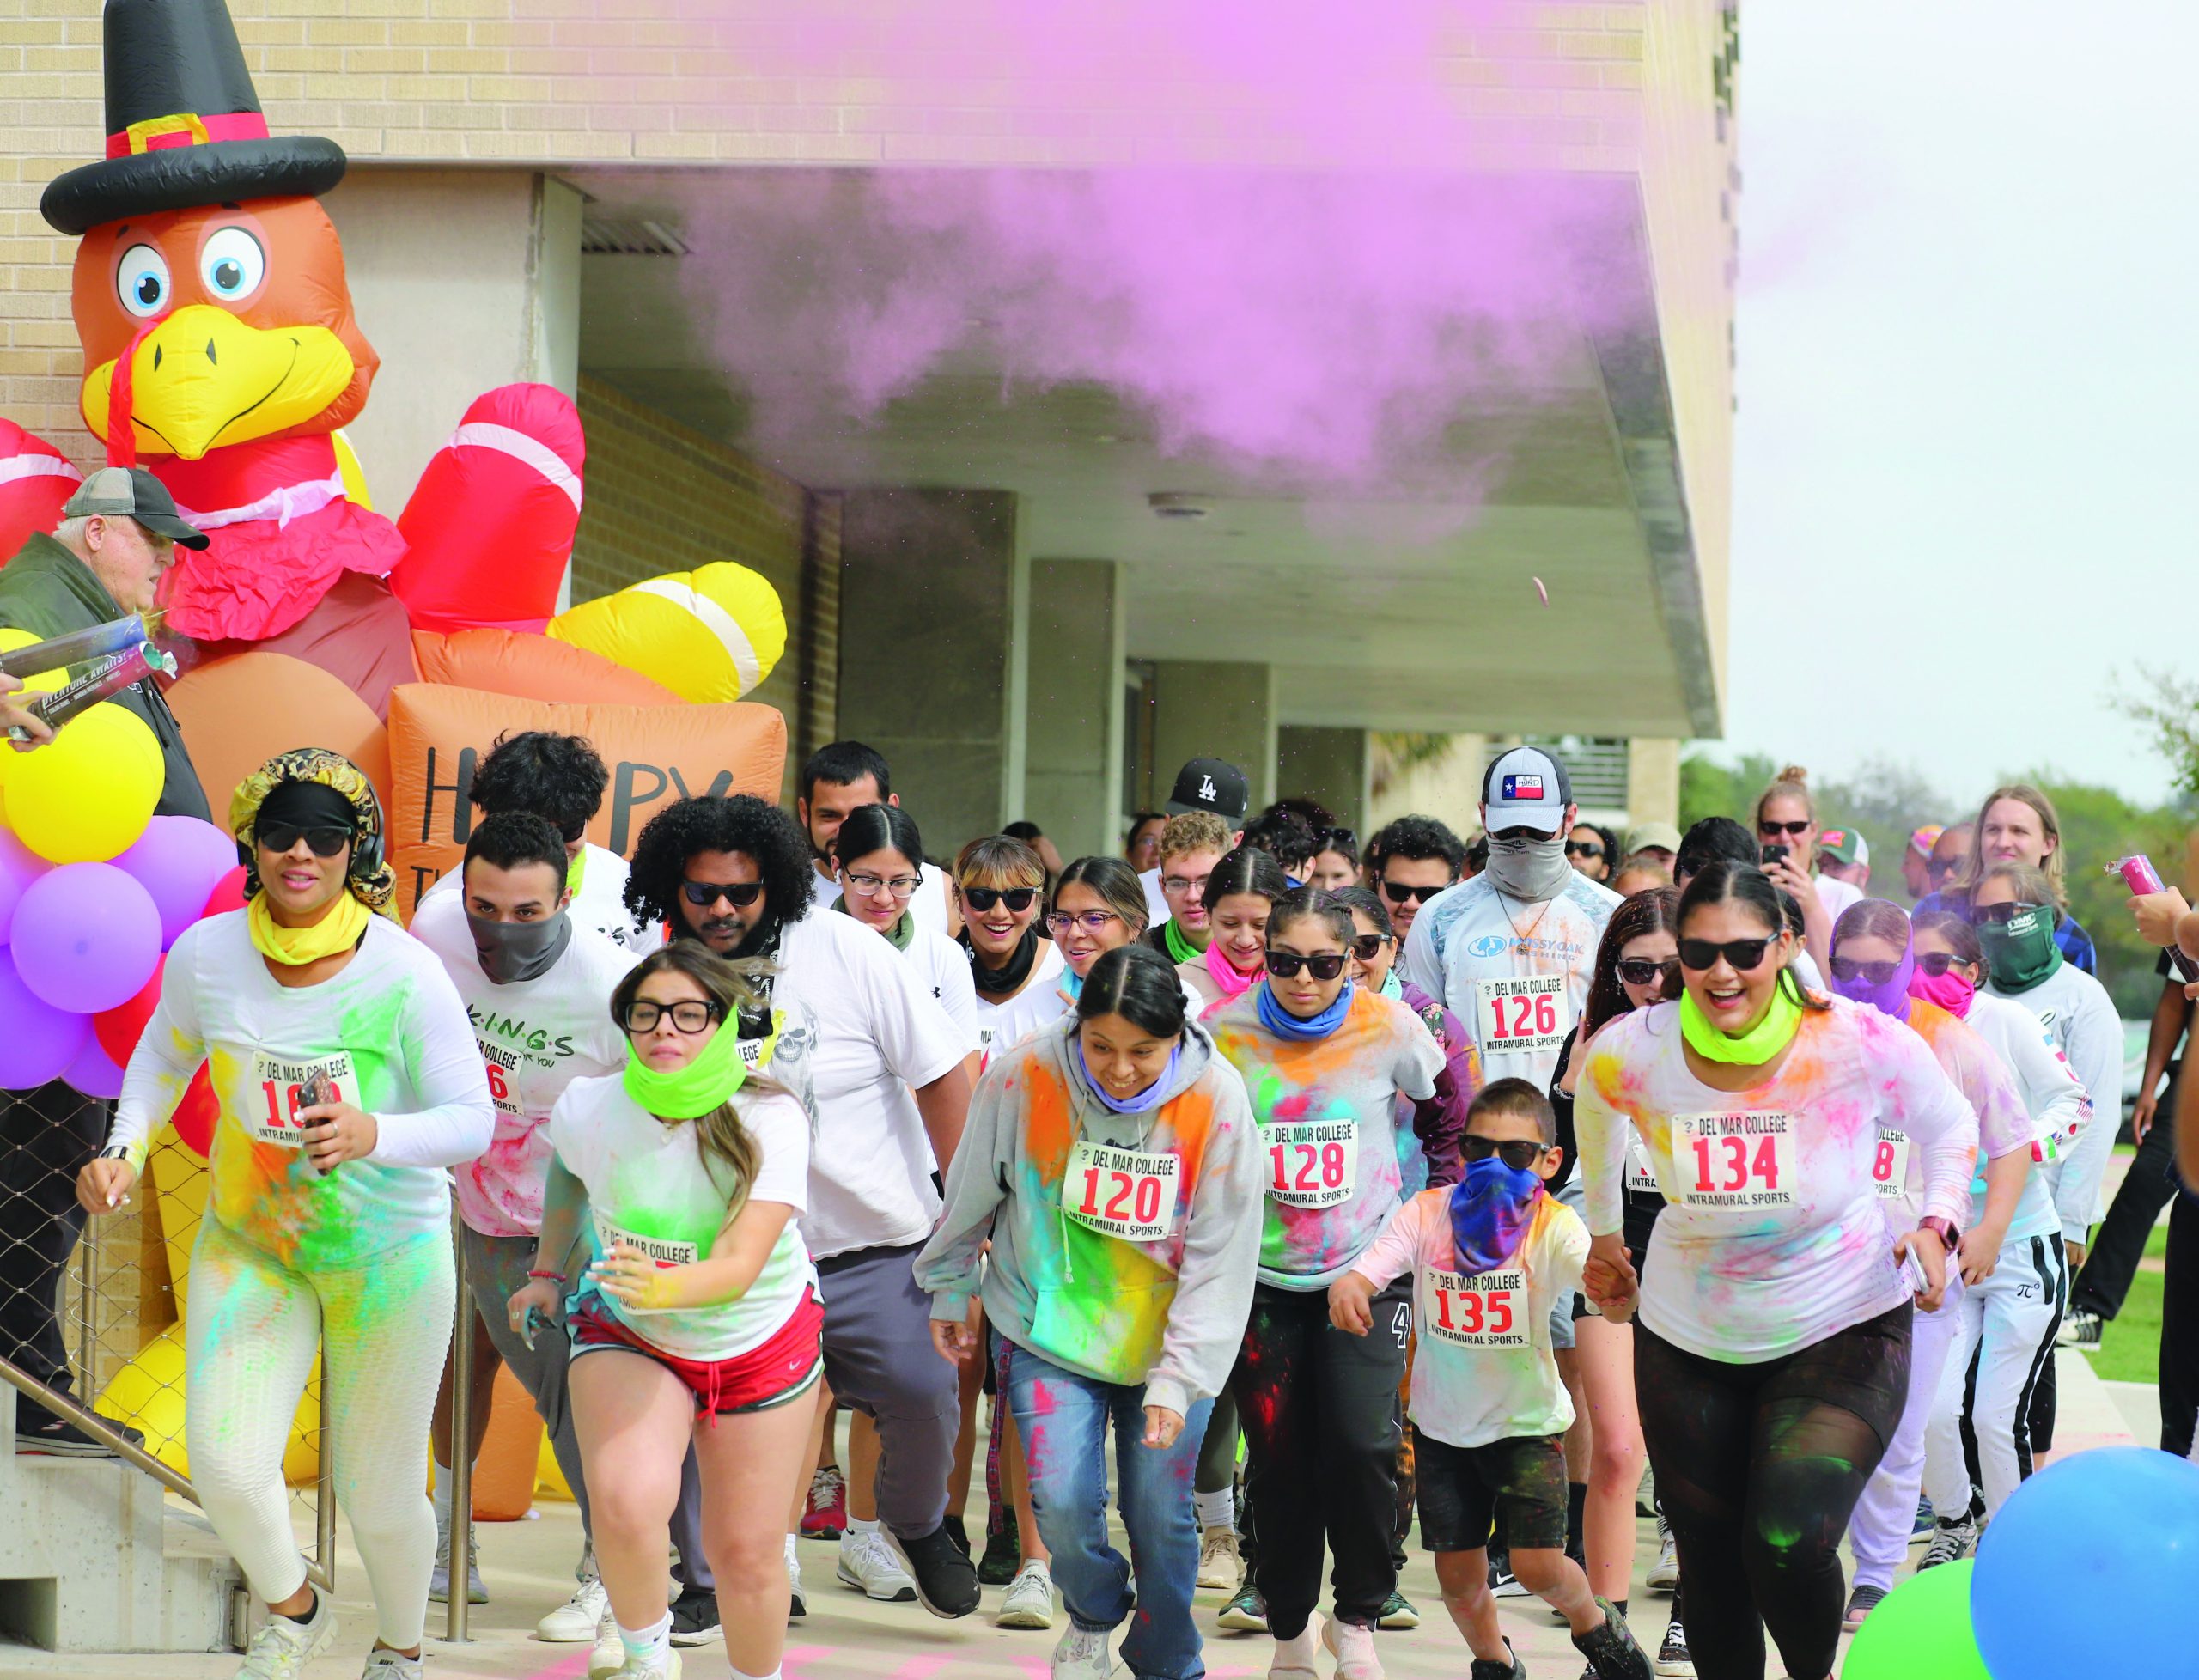 DMC held The Huffin’ for Stuffin’ color run at Heritage Campus